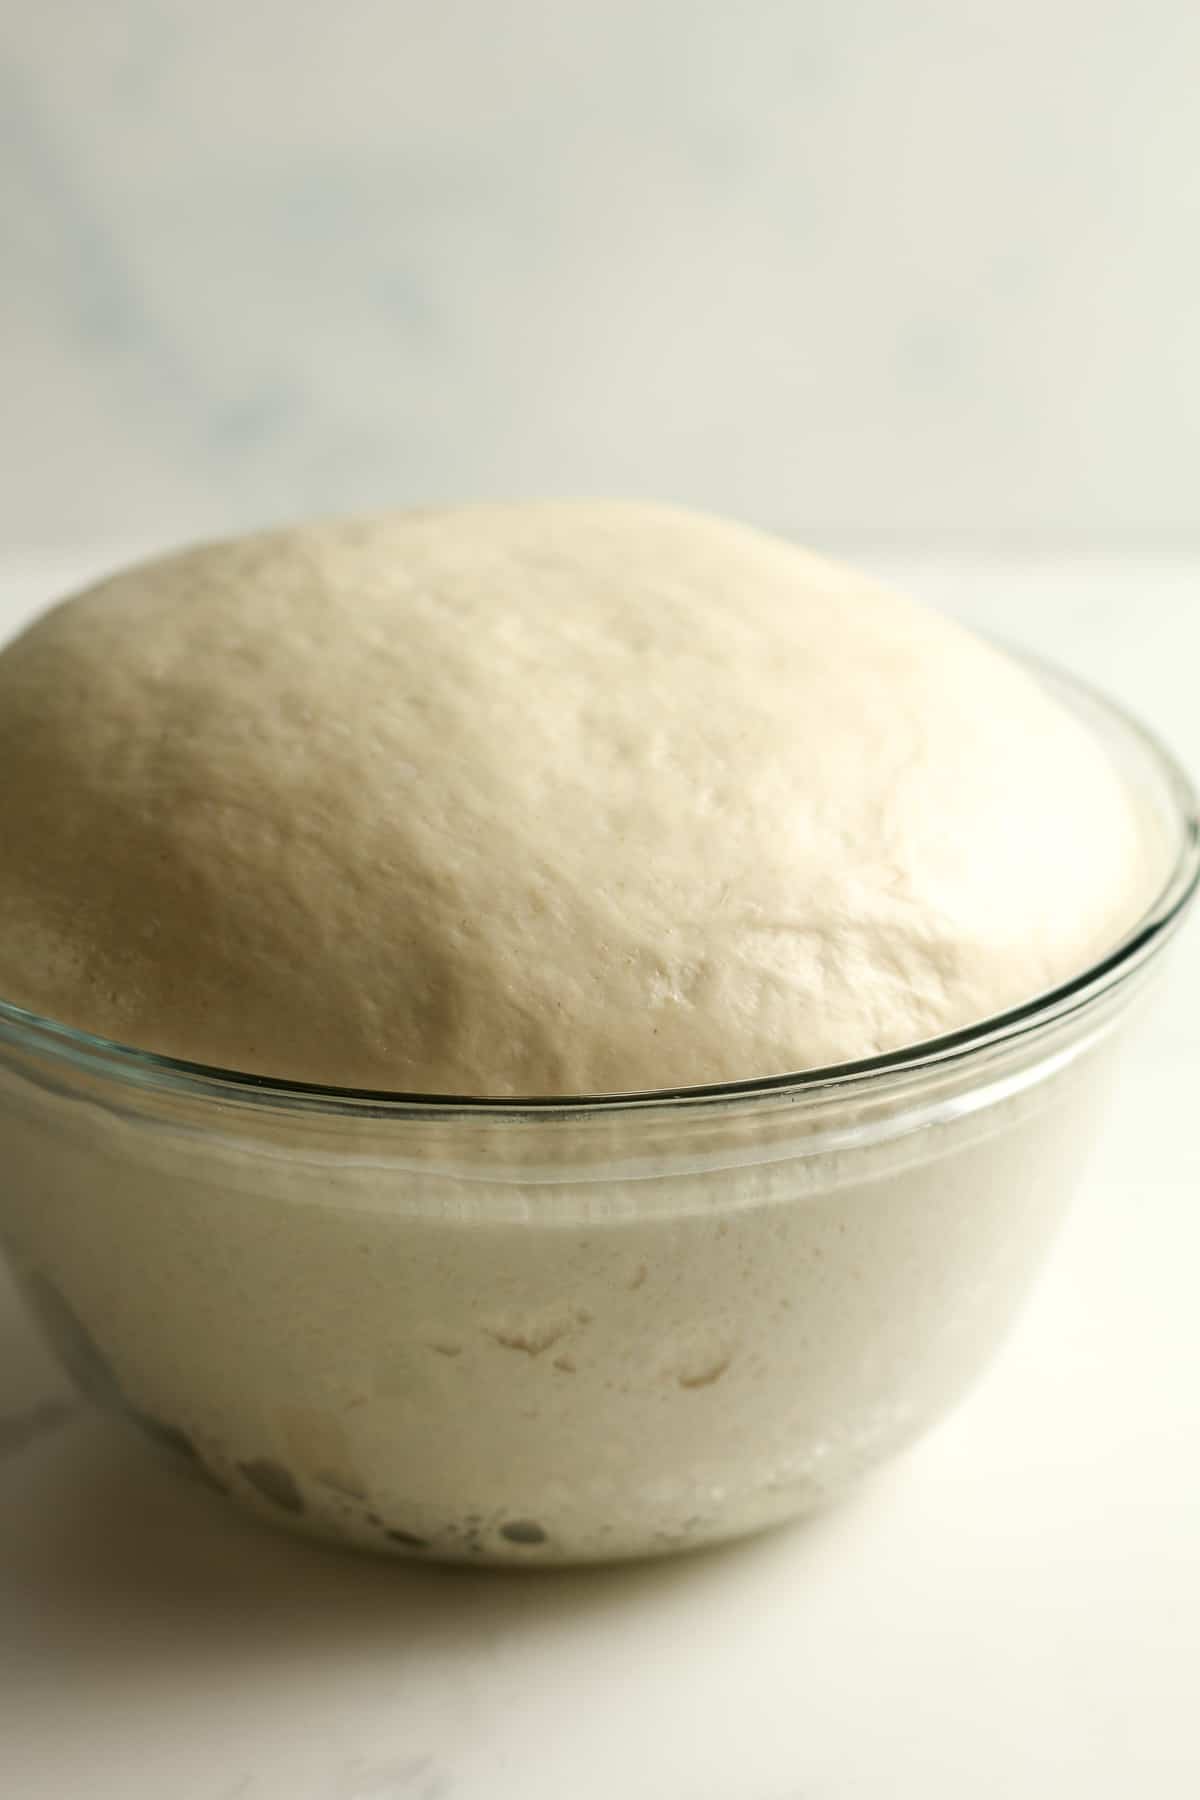 Side view of the bread dough.